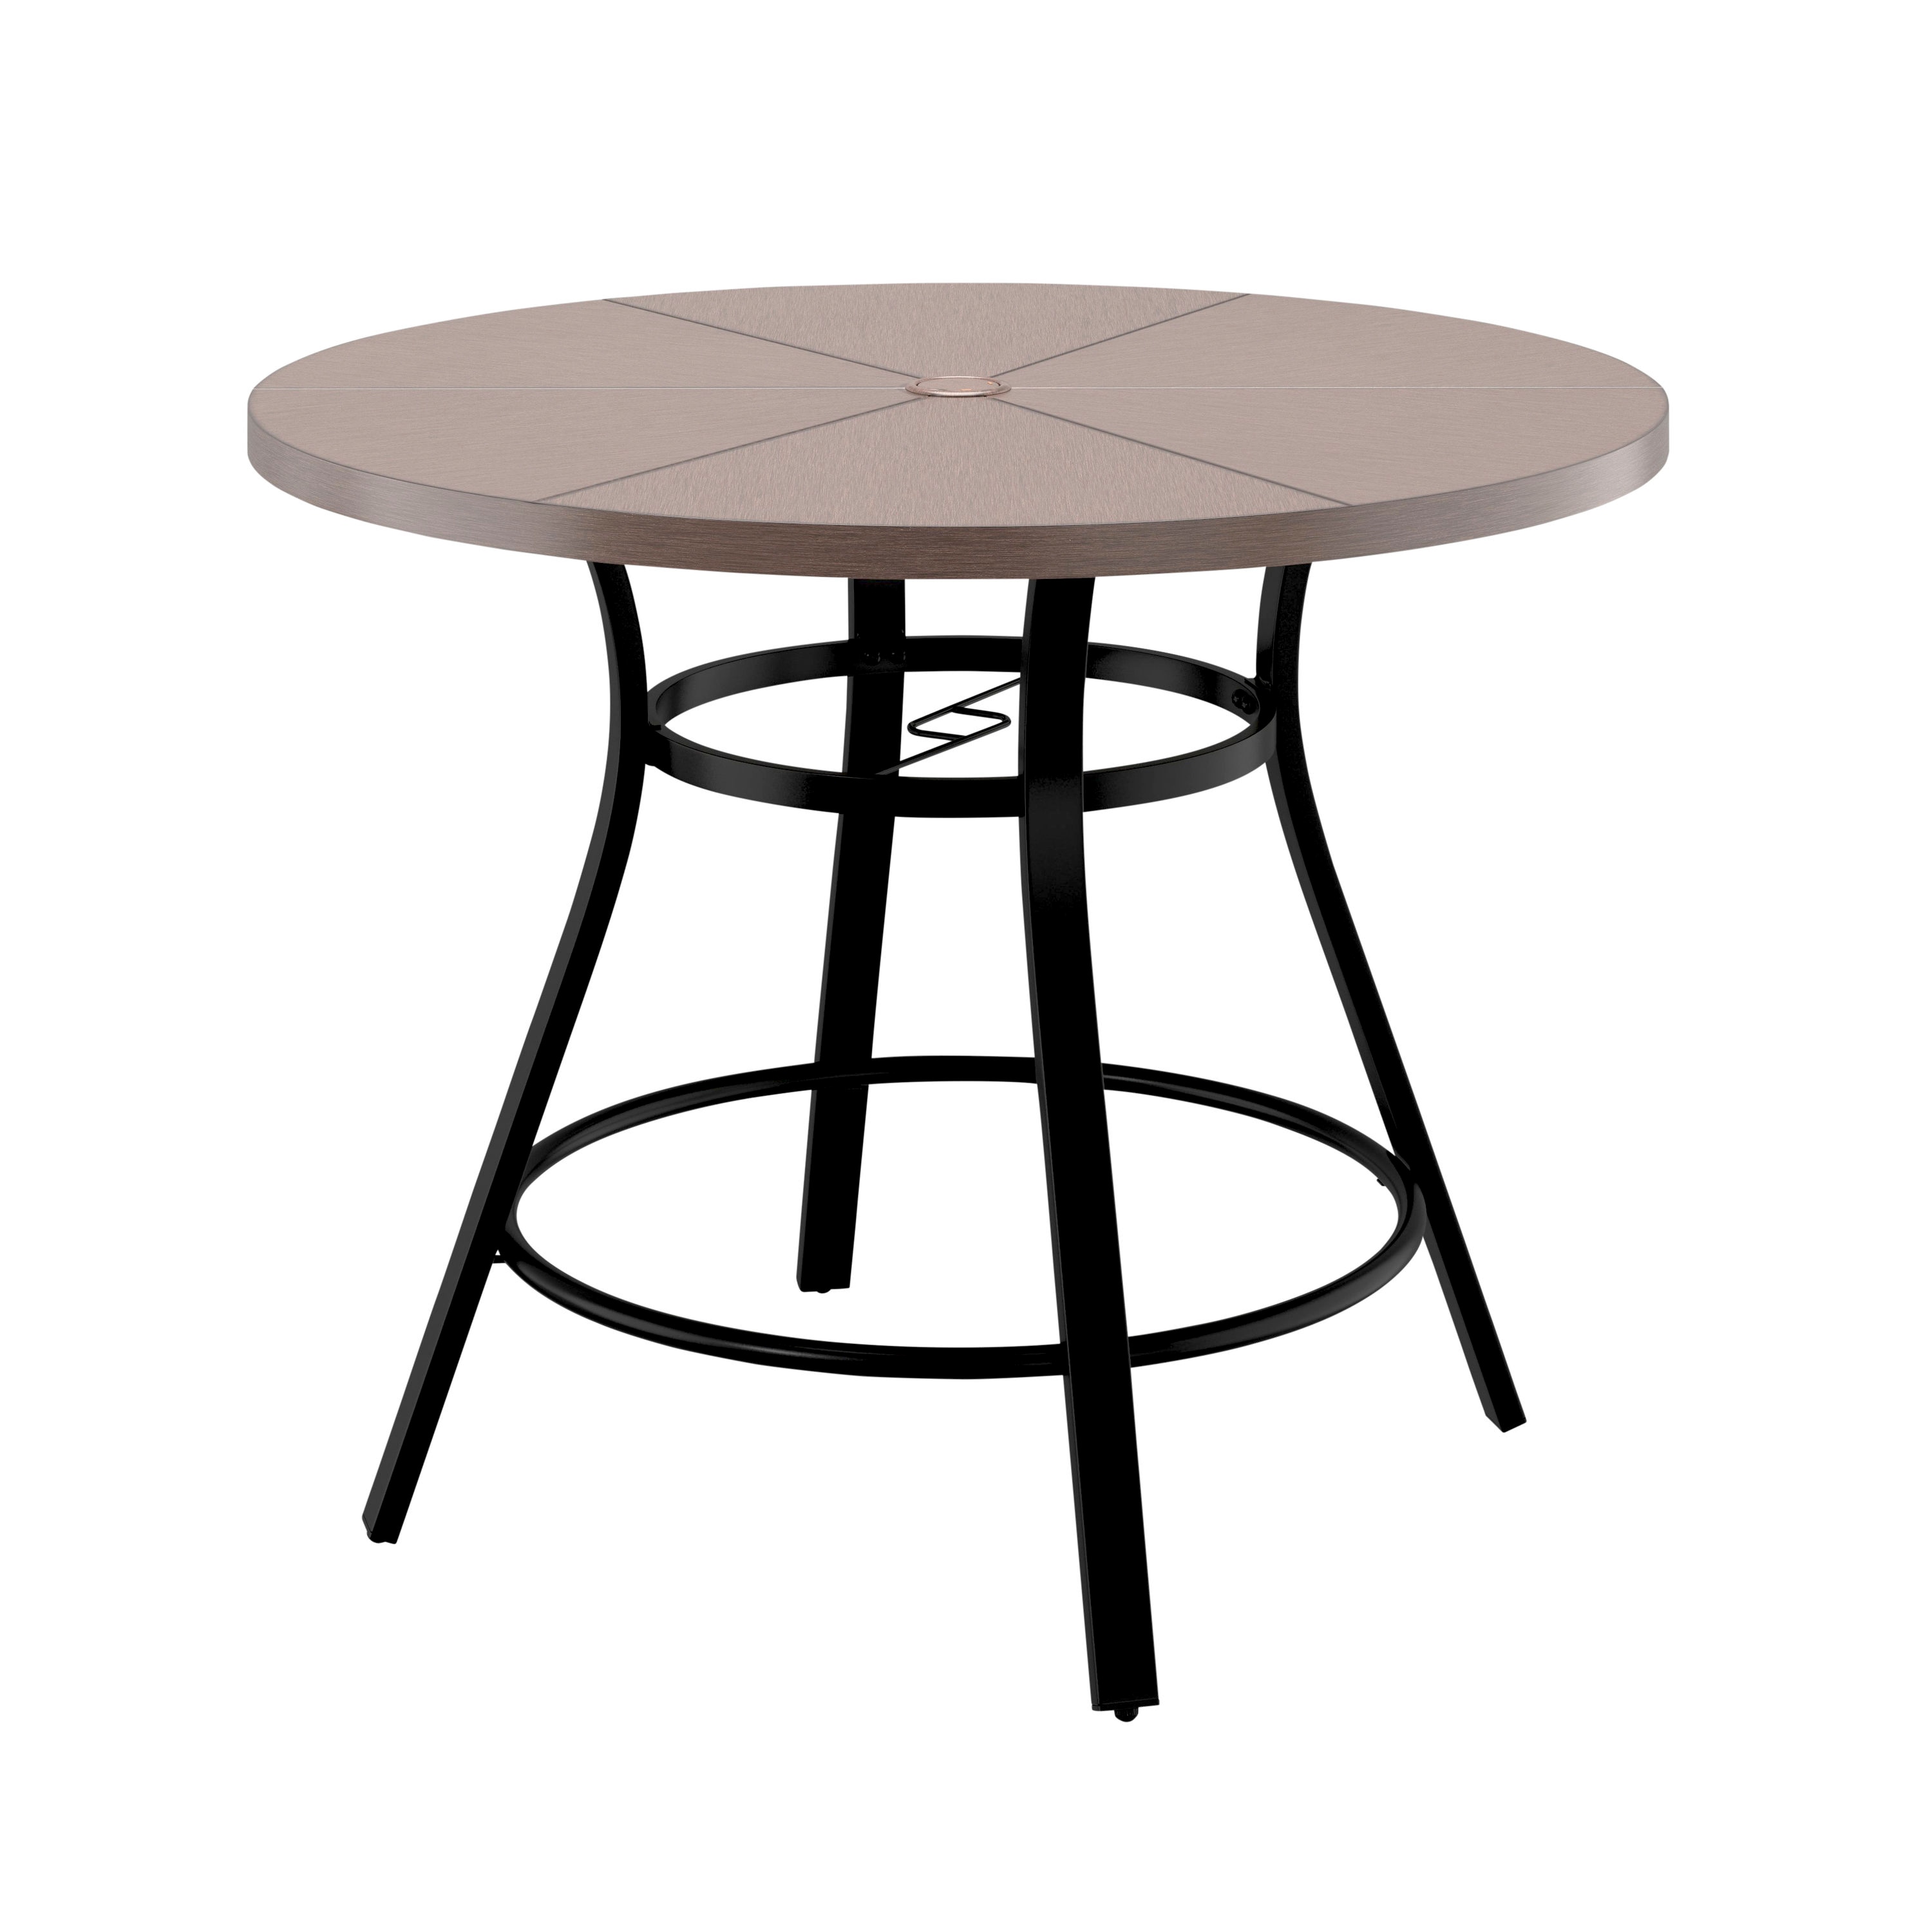 Glenwood Round Outdoor Dining Table 48-in W x 48-in L with Umbrella Hole | - Style Selections FTS61368